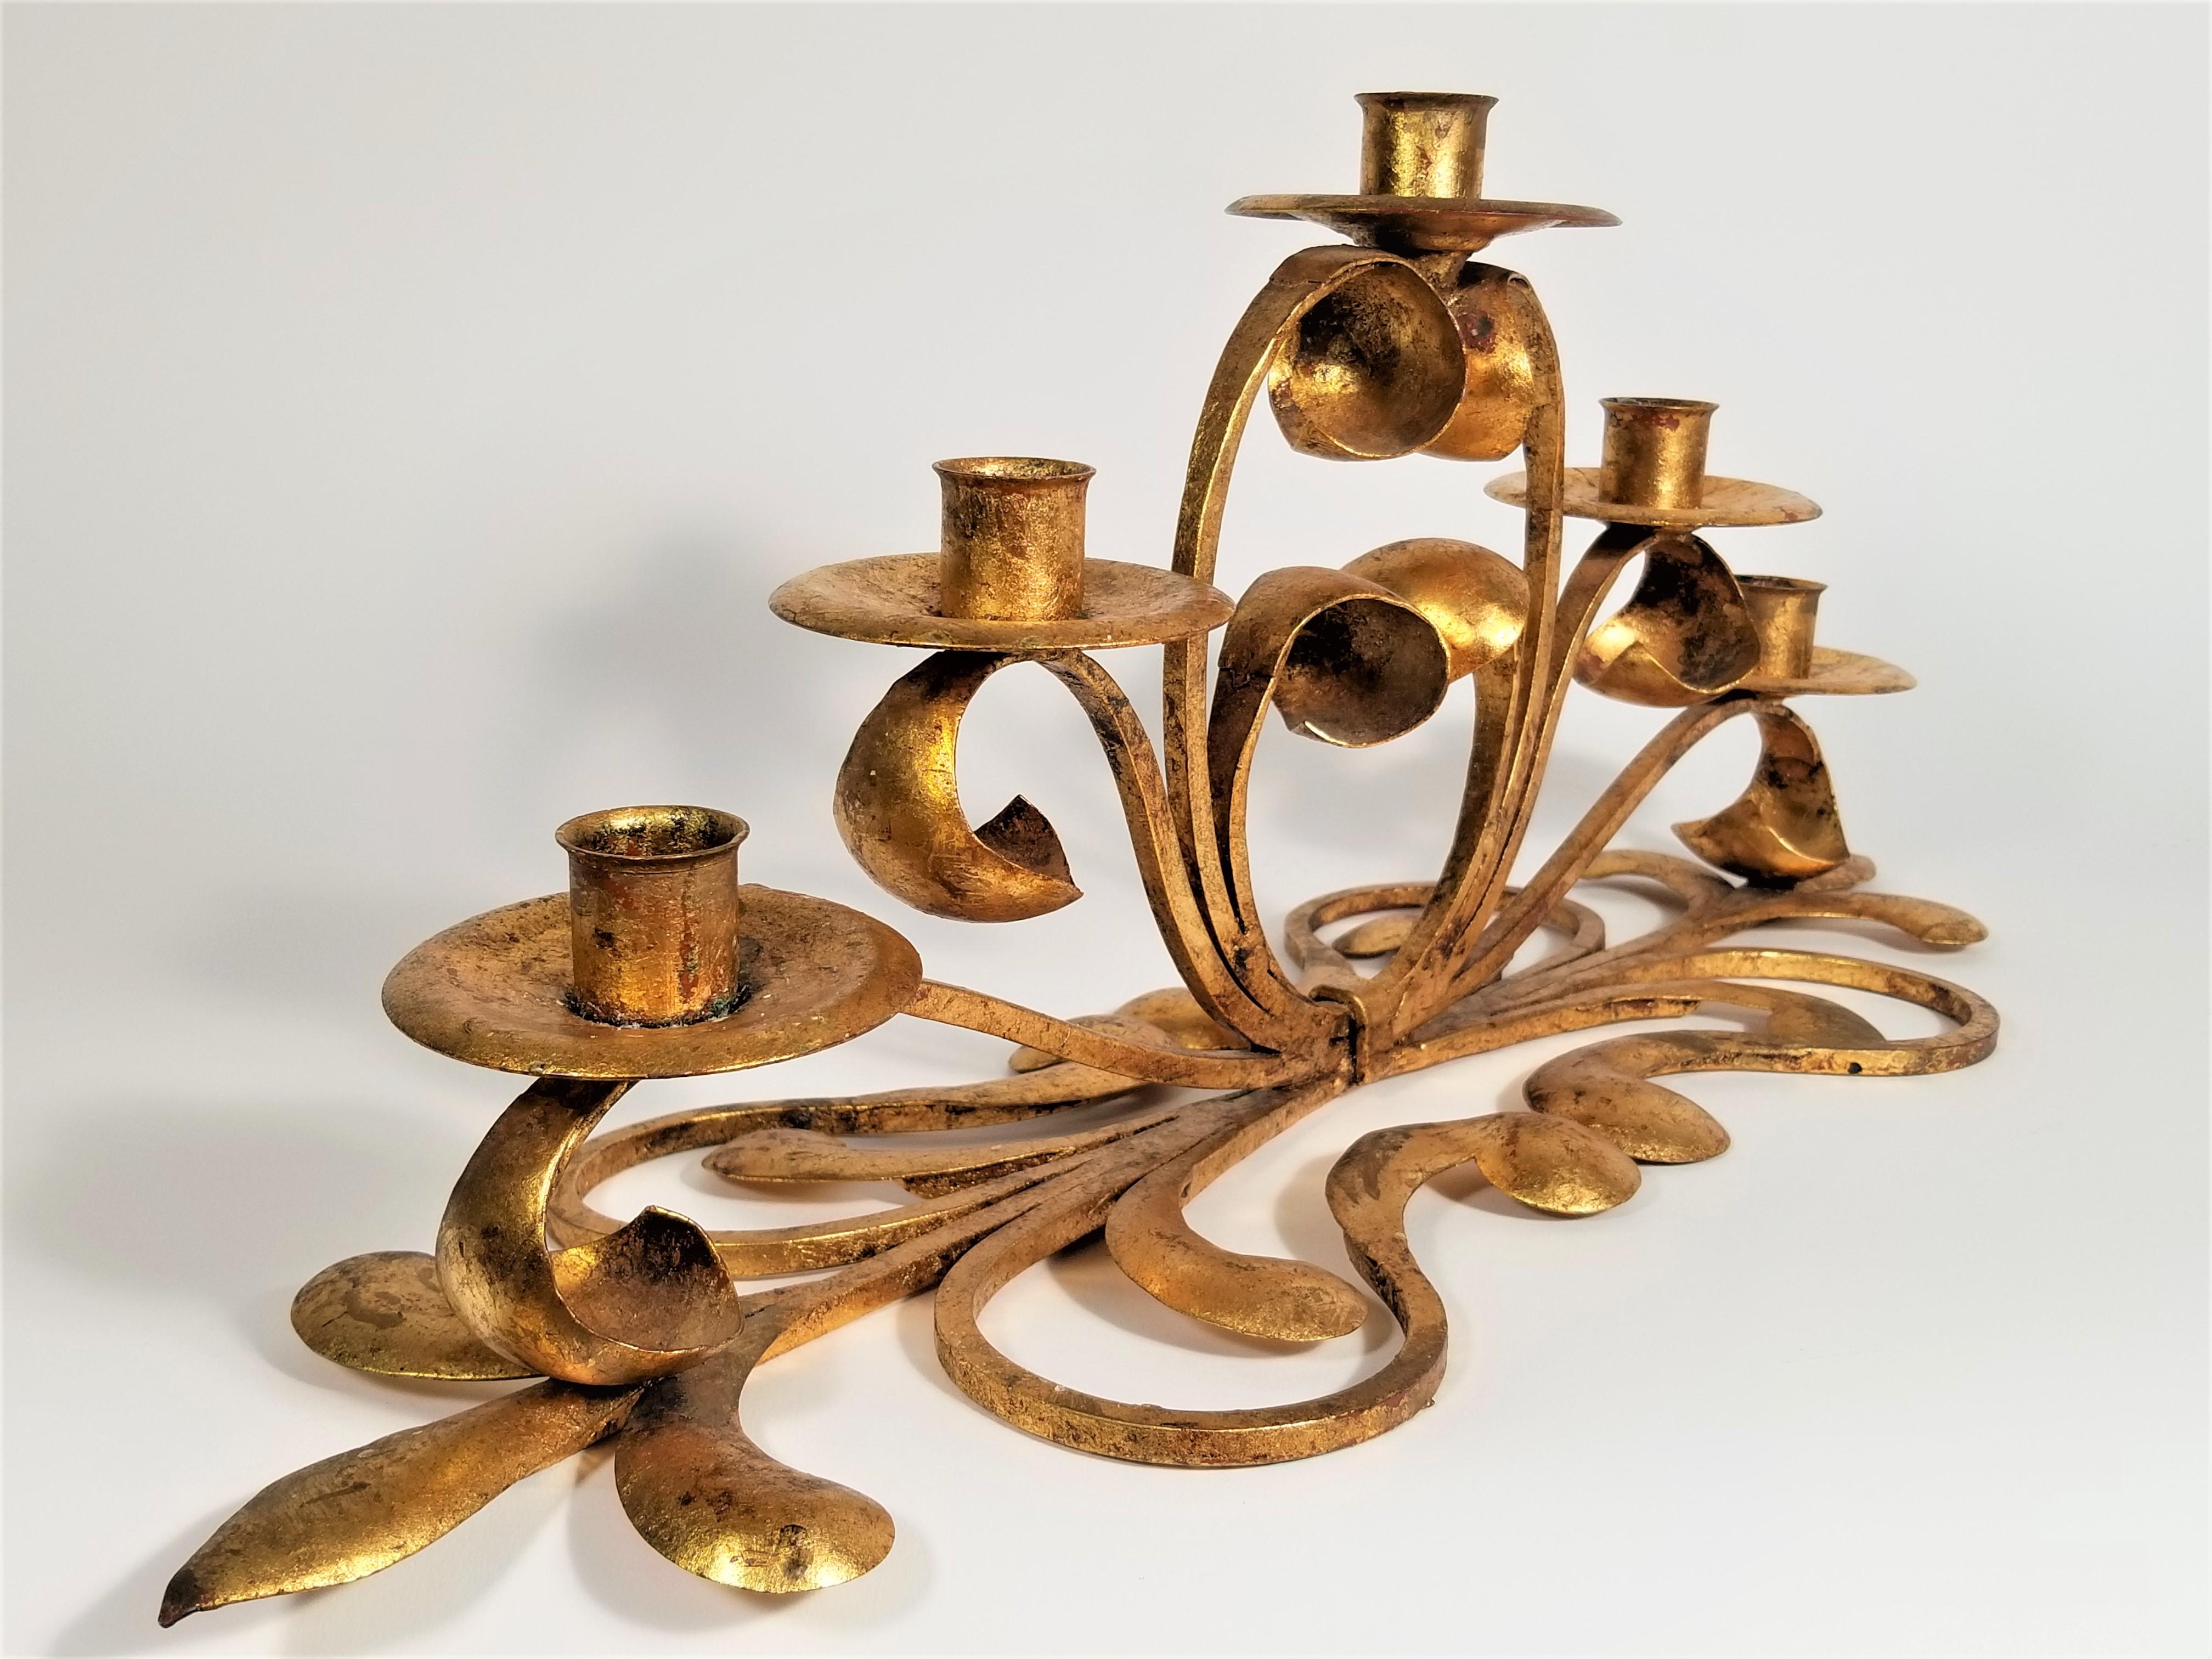 Italian Signed S. Salvadori  Gilded Candelabra, 1950s  Made in Italy In Excellent Condition For Sale In New York, NY